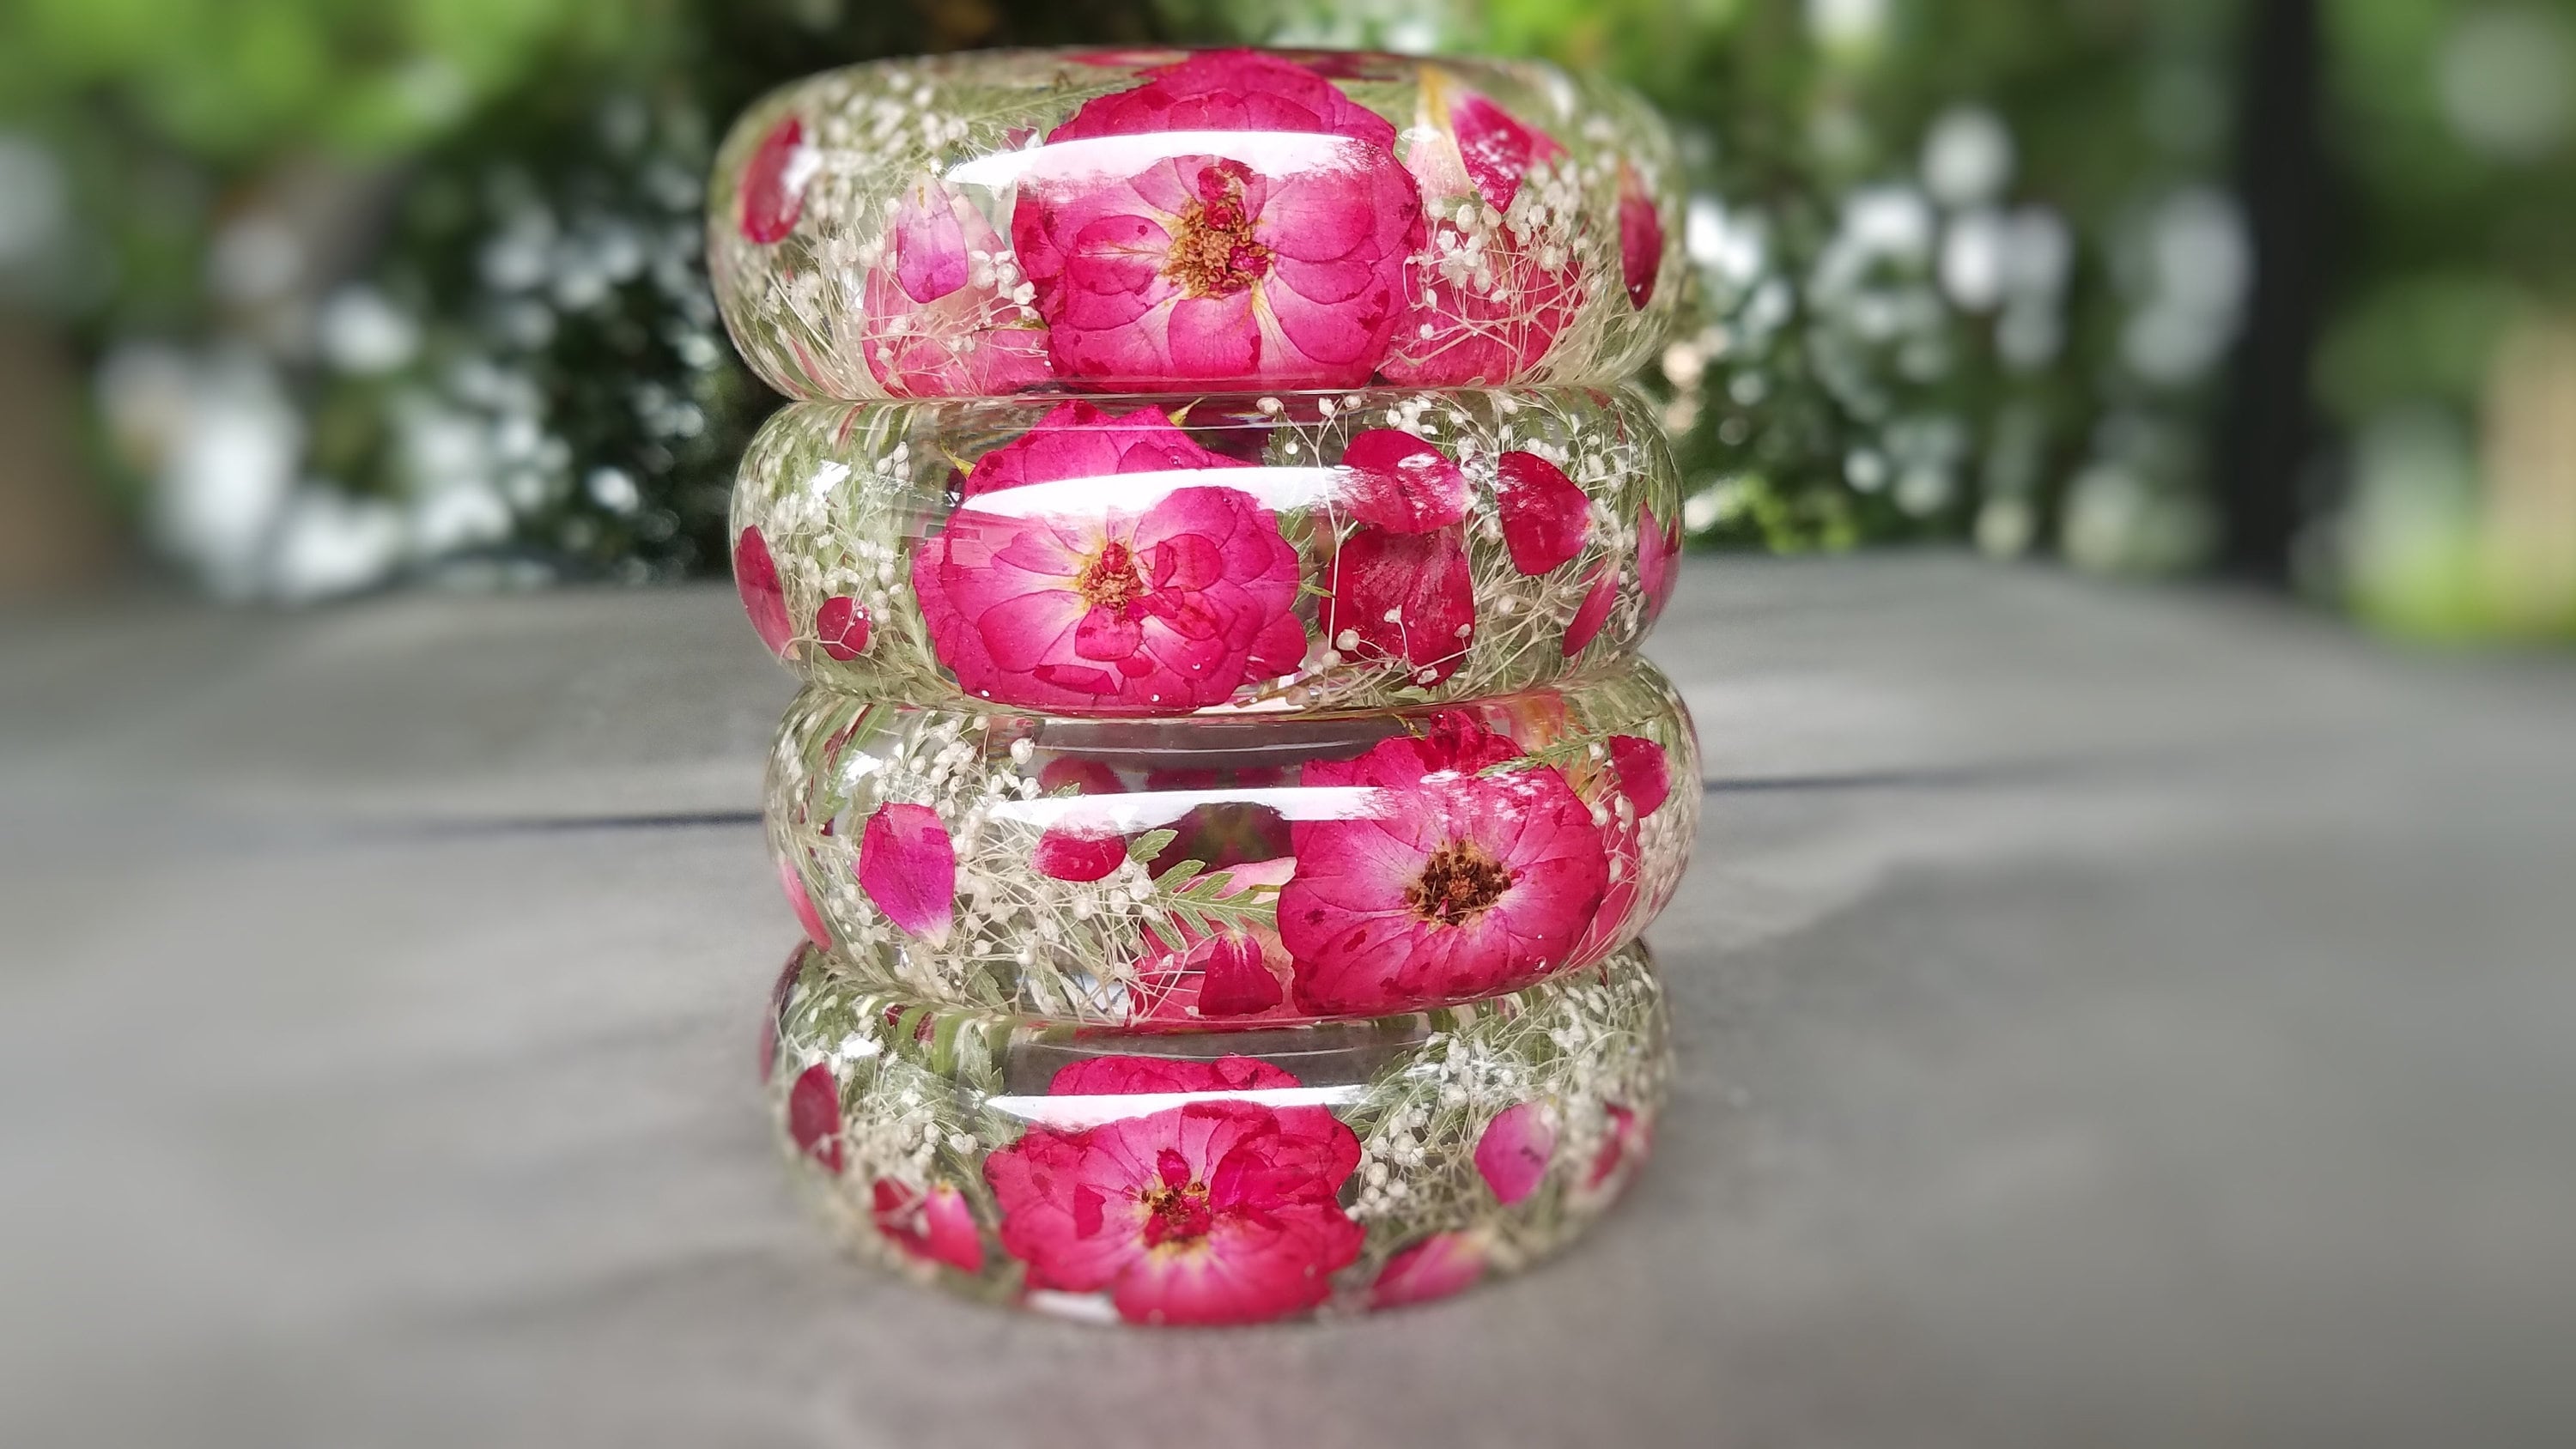 Wholesale Shop for Bracelet Handmade Floral Beads Made With Resin